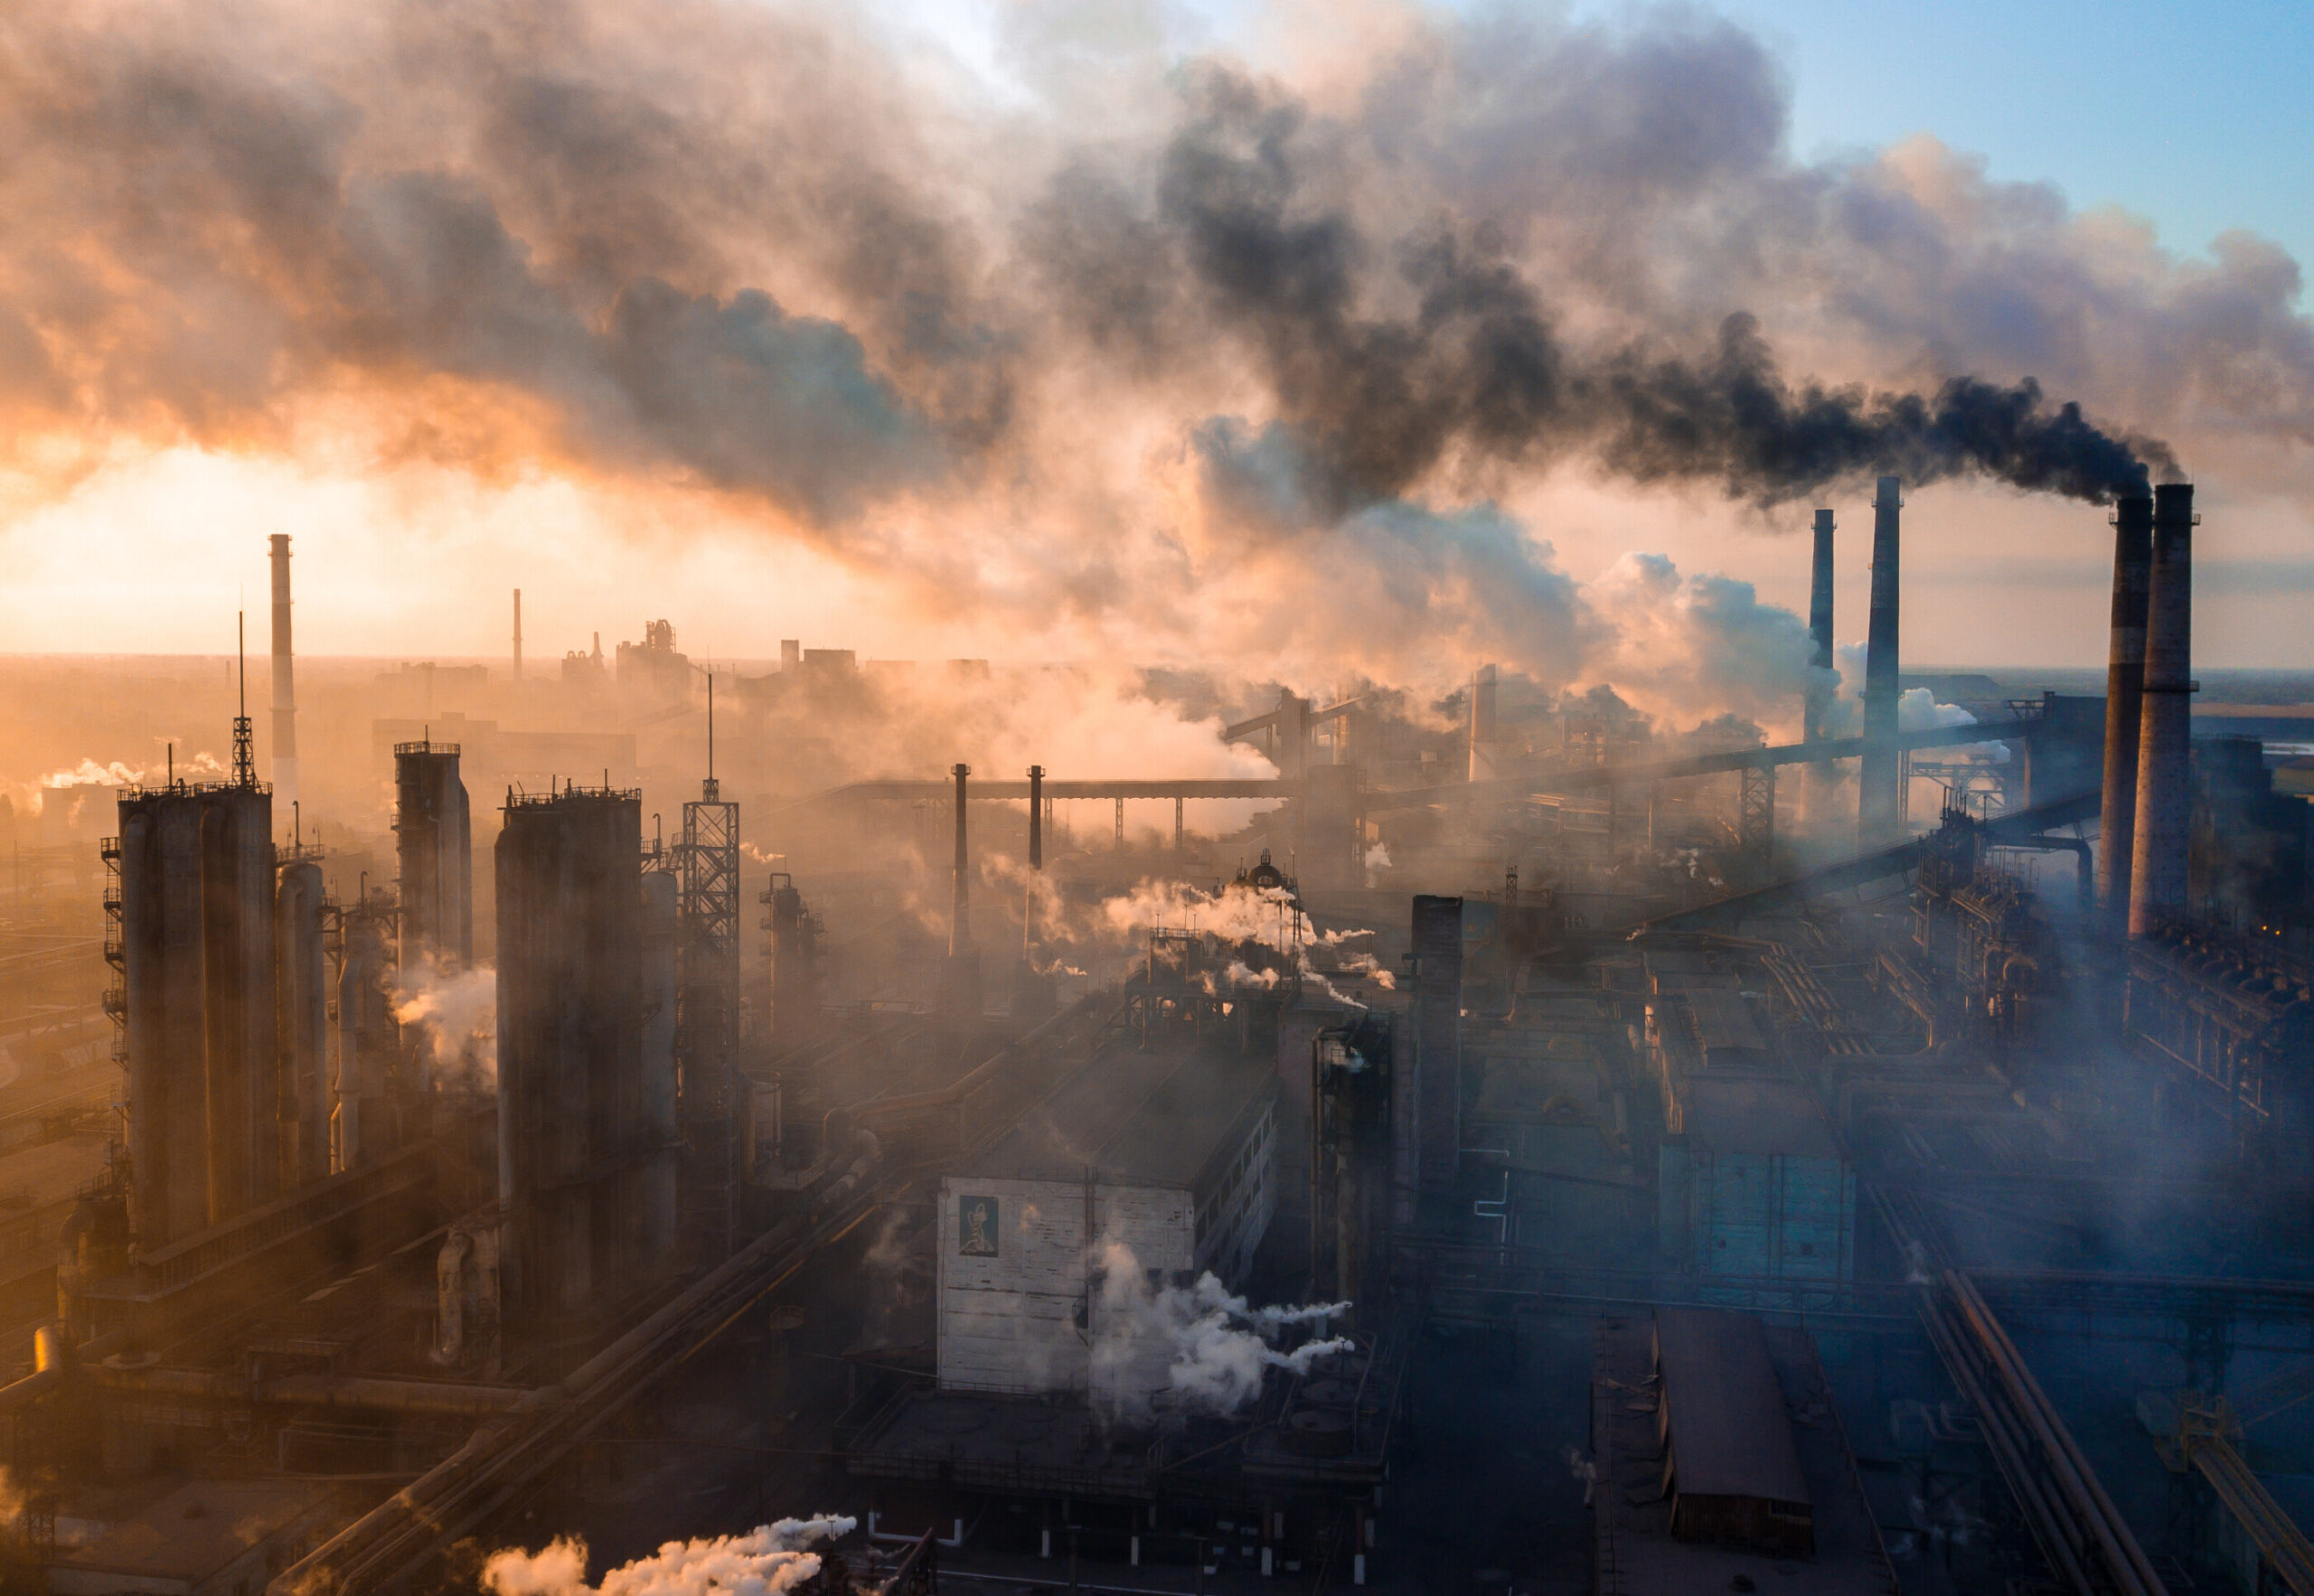 Industry,Metallurgical,Plant,Dawn,Smoke,Smog,Emissions,Bad,Ecology,Aerial